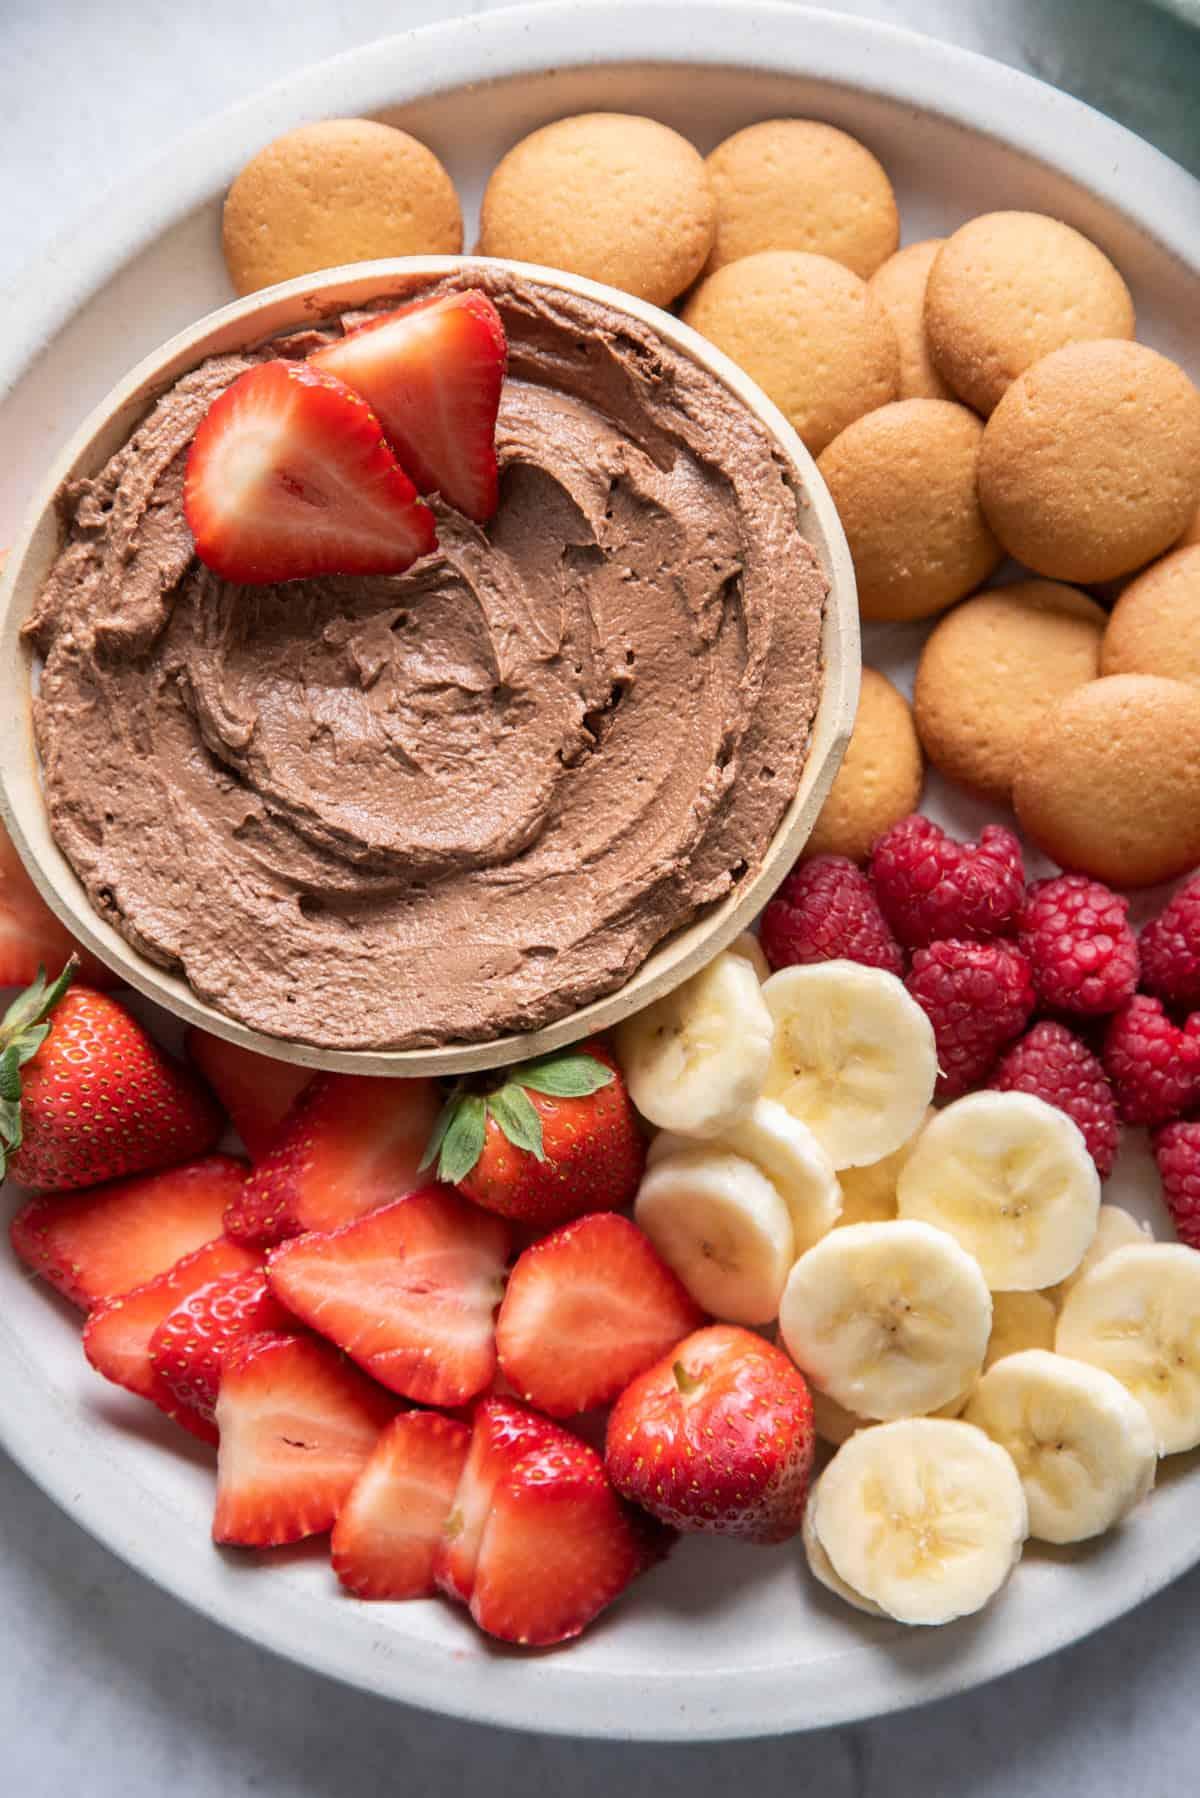 Swap your PB&J for this sweet and savory dip with a side of your favorite fruit. (via <a href="https://feelgoodfoodie.net/recipe/chocolate-peanut-butter-dip/"><strong>Feel Good Foodie</strong></a>)